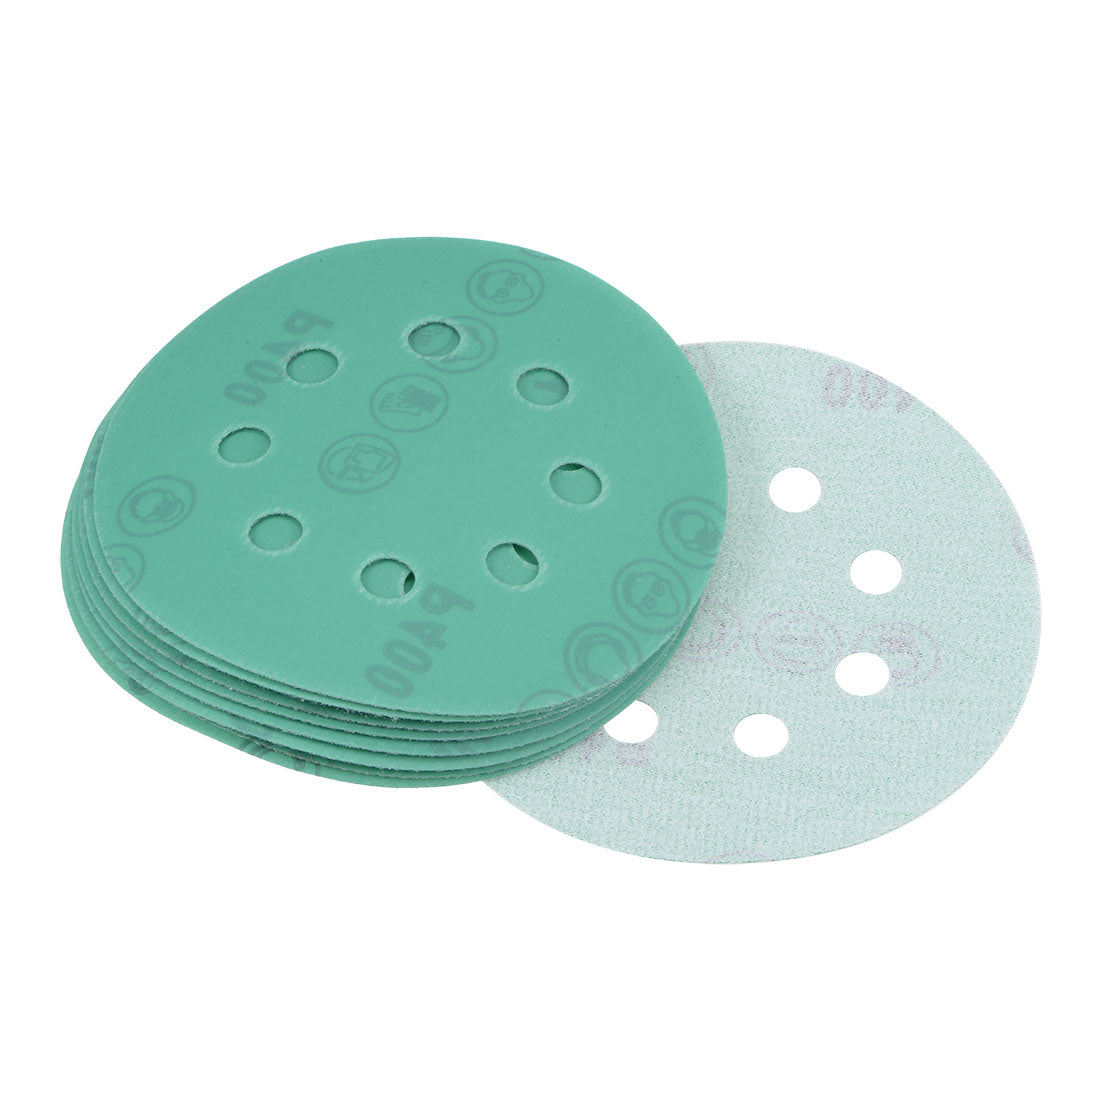 Uxcell Uxcell 5 Inch 8 Hole 800 Grits Hook and Loop Sanding Discs Wet Dry Sandpaper 2pcs